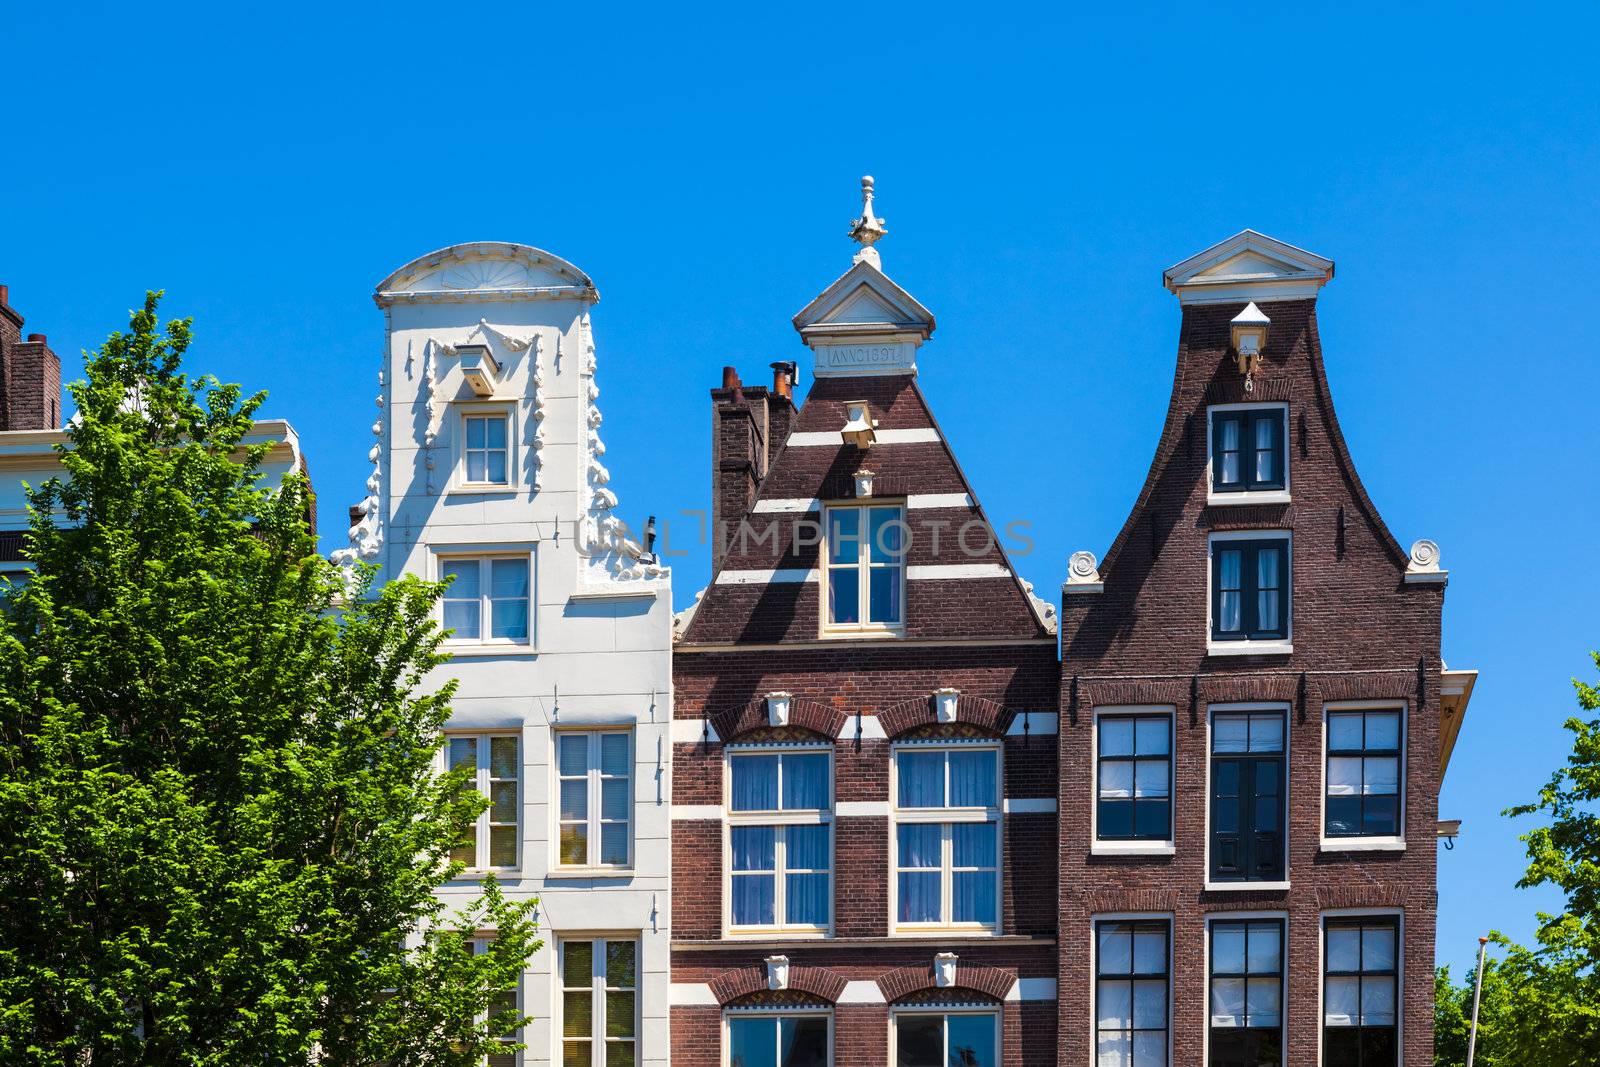 Typical gable houses in downtown Amsterdam, the Netherlands